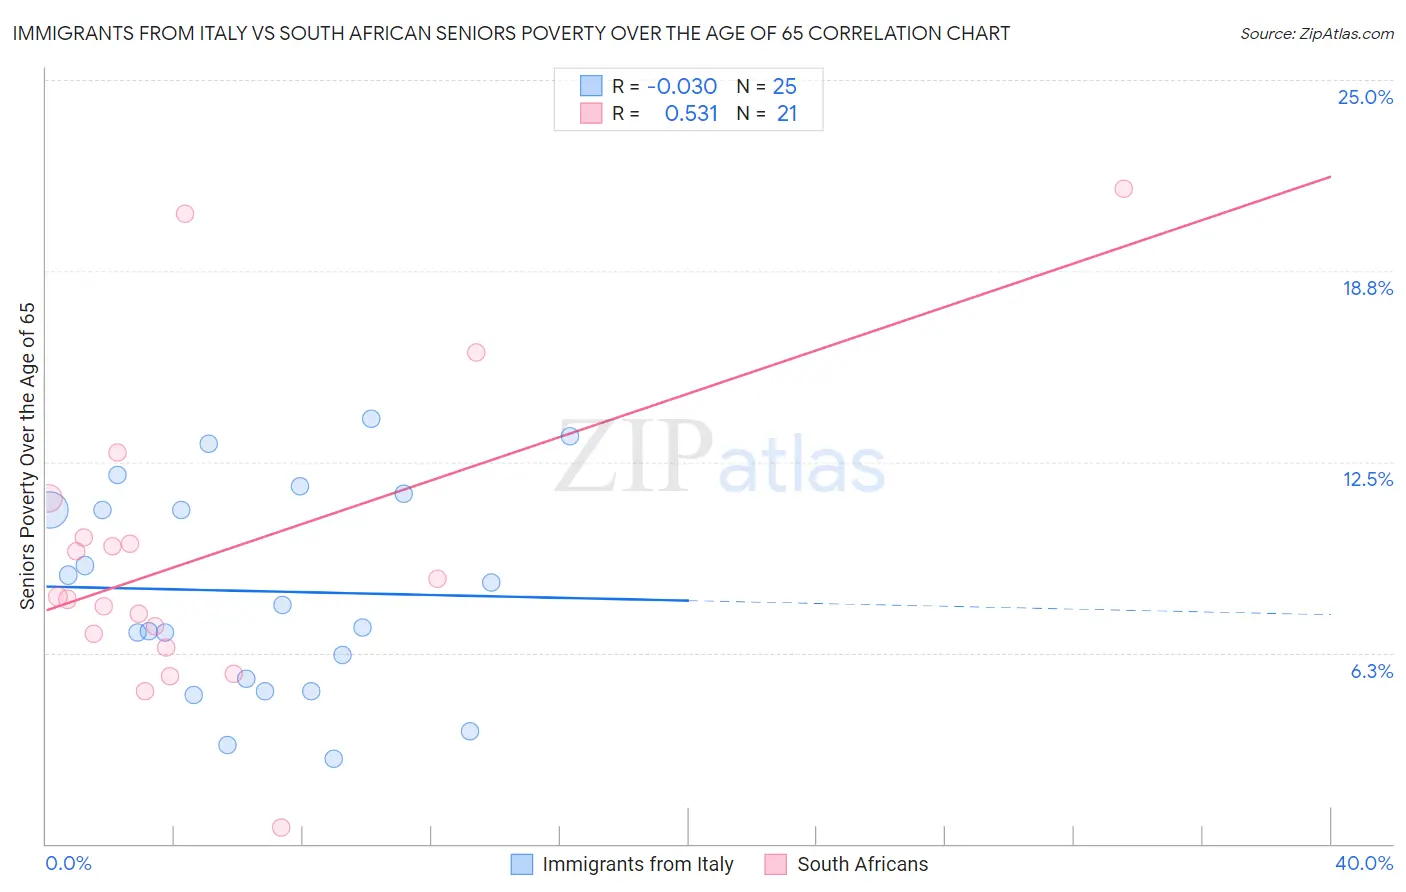 Immigrants from Italy vs South African Seniors Poverty Over the Age of 65